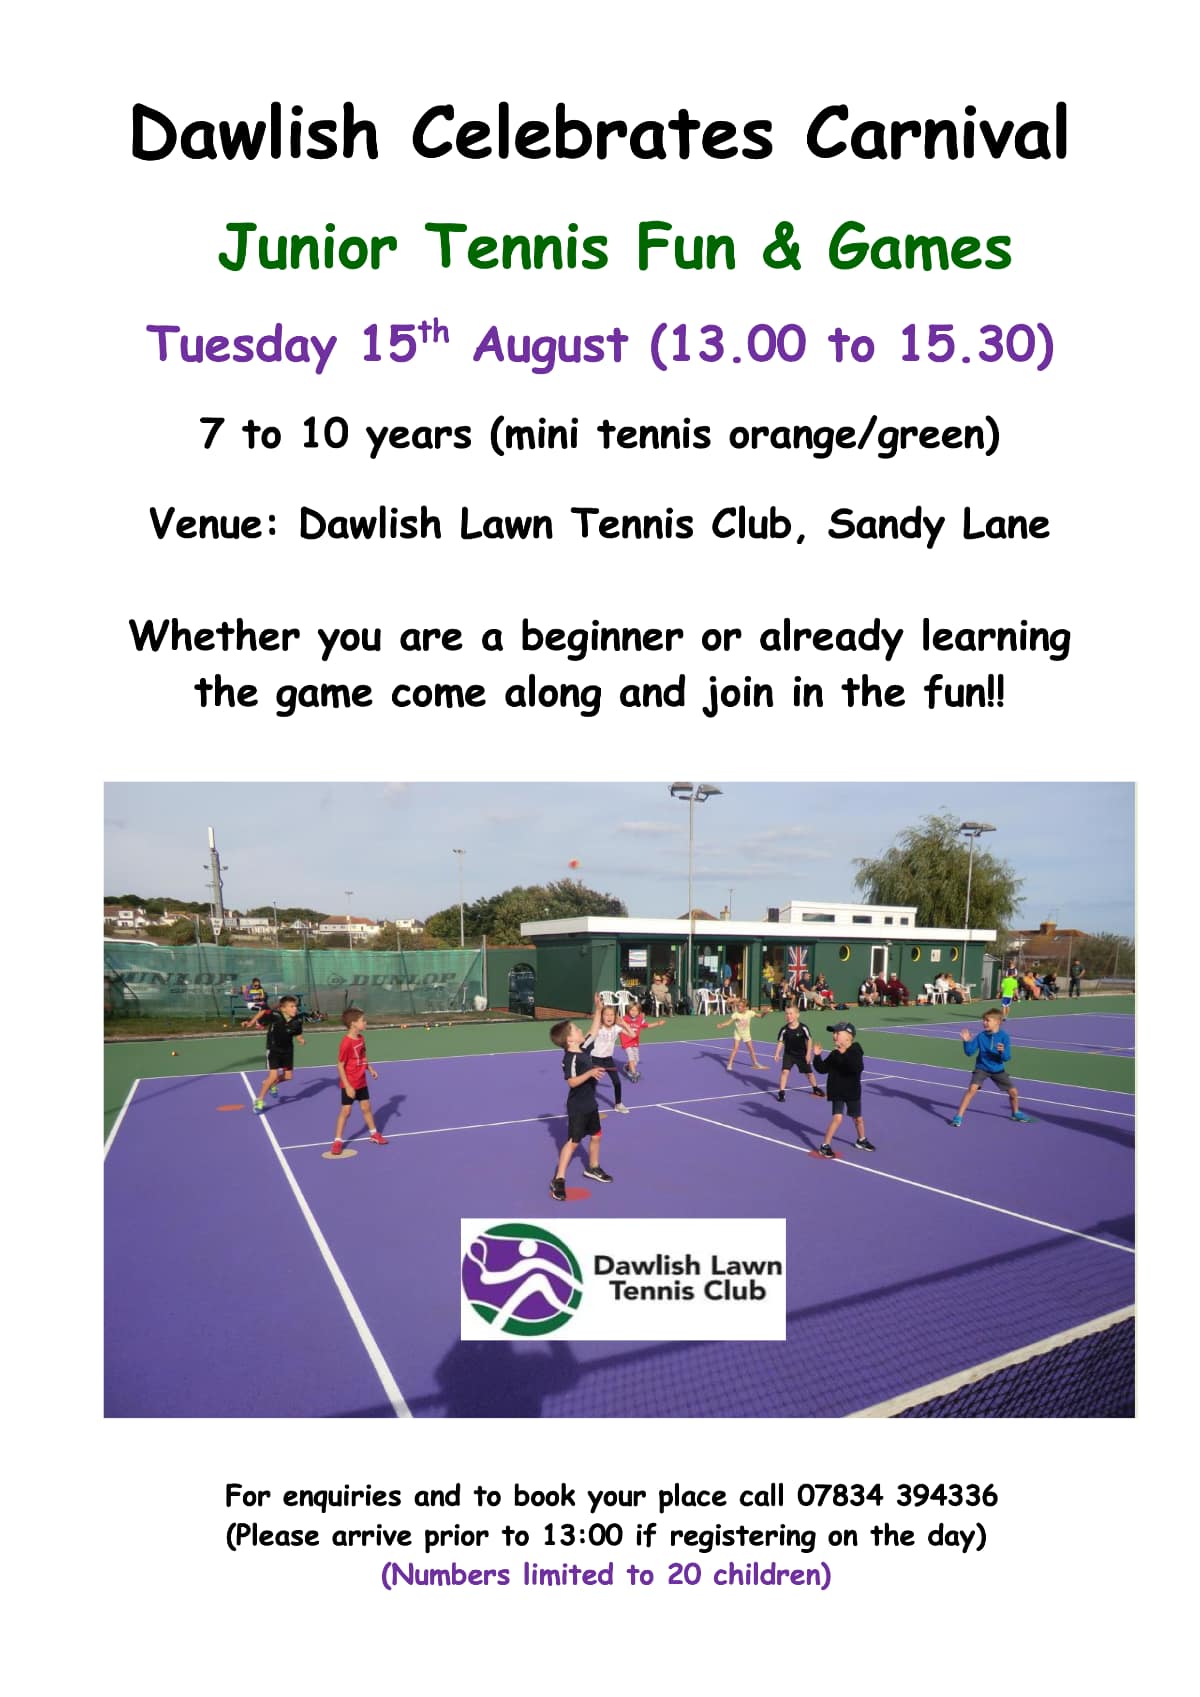 Dawlish Lawn Tennis Club - Information poster for Junior Tennis Fin & games on 15th August 2023